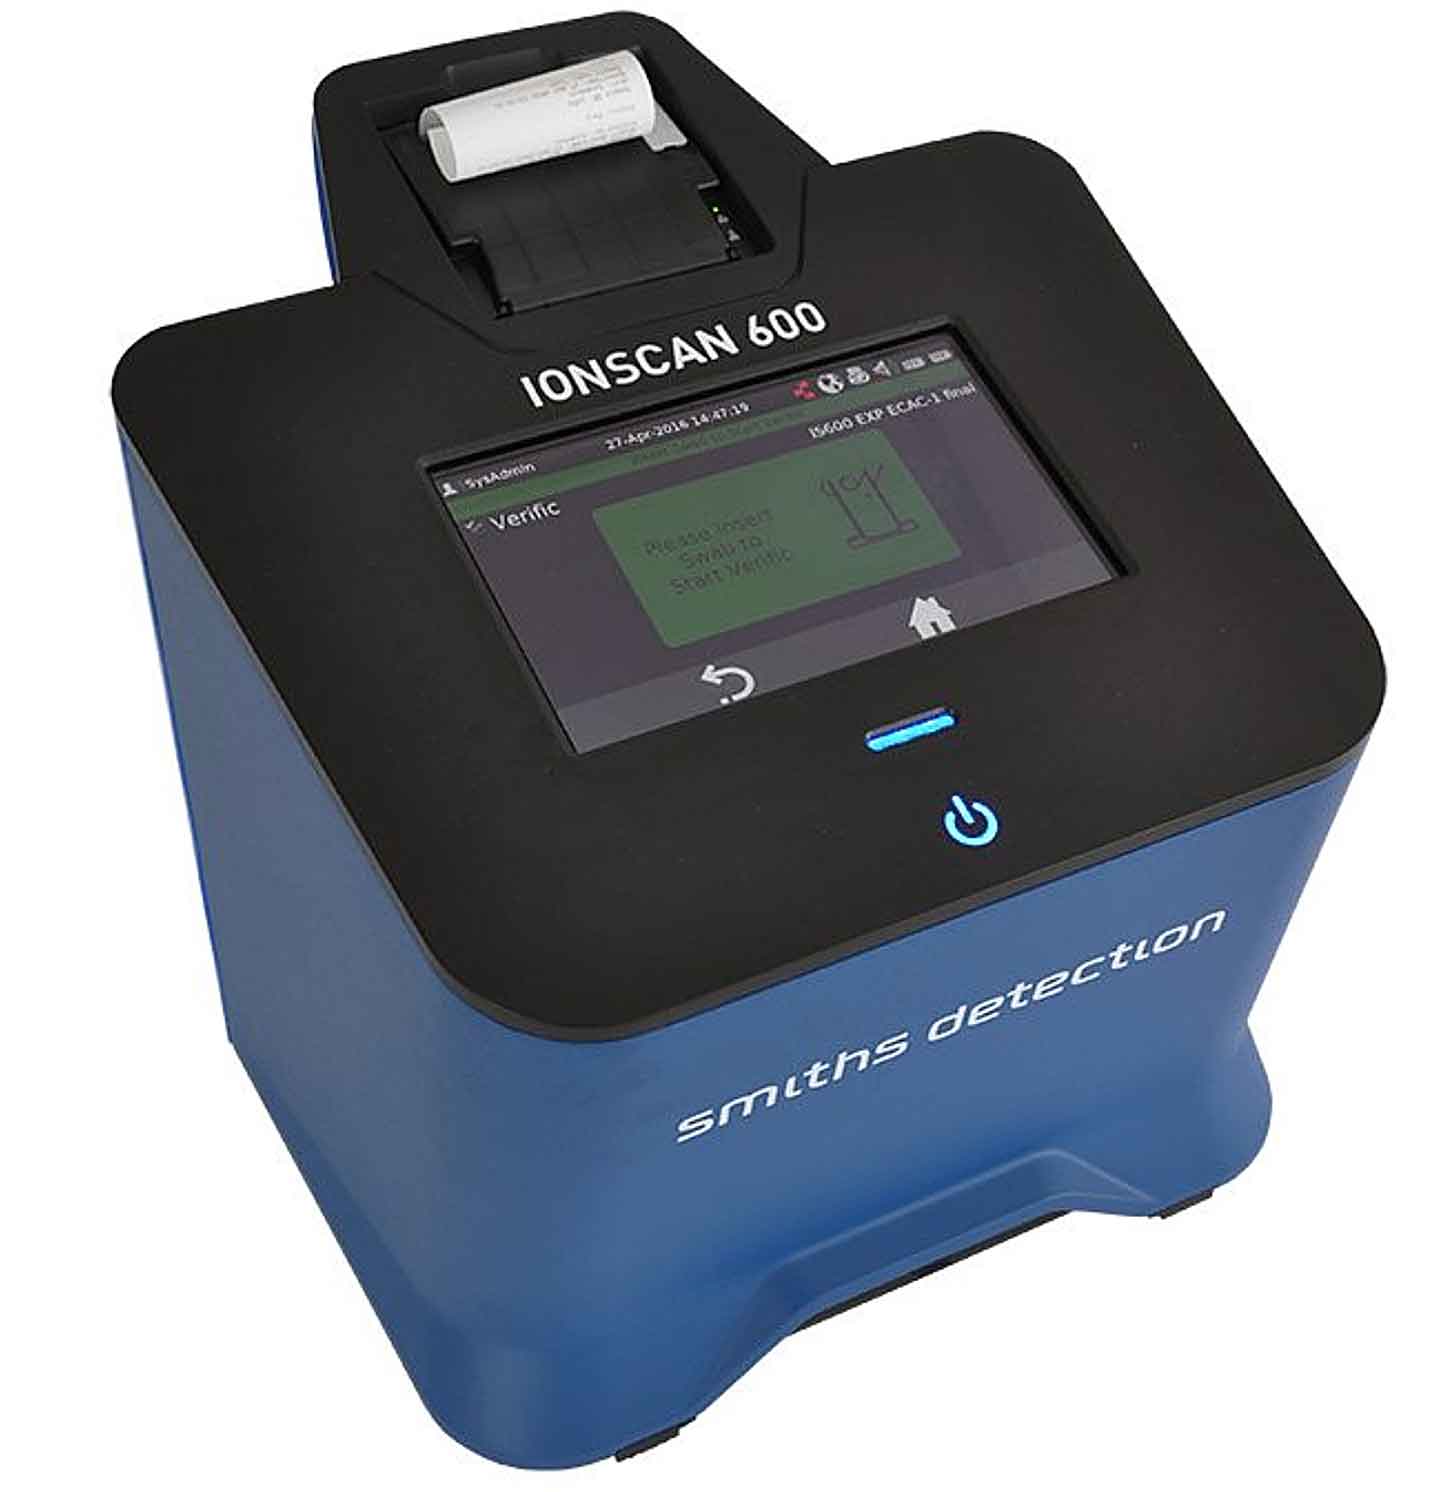 The IONSCAN 600 is a highly sensitive trace detector, in a lightweight, portable desktop configuration. It can be used to accurately detect and identify a wide range of military, commercial and homemade explosives threats and common illegal/controlled narcotics, including the highly potent synthetic fentanyl opioids that are rapidly spreading across the world.